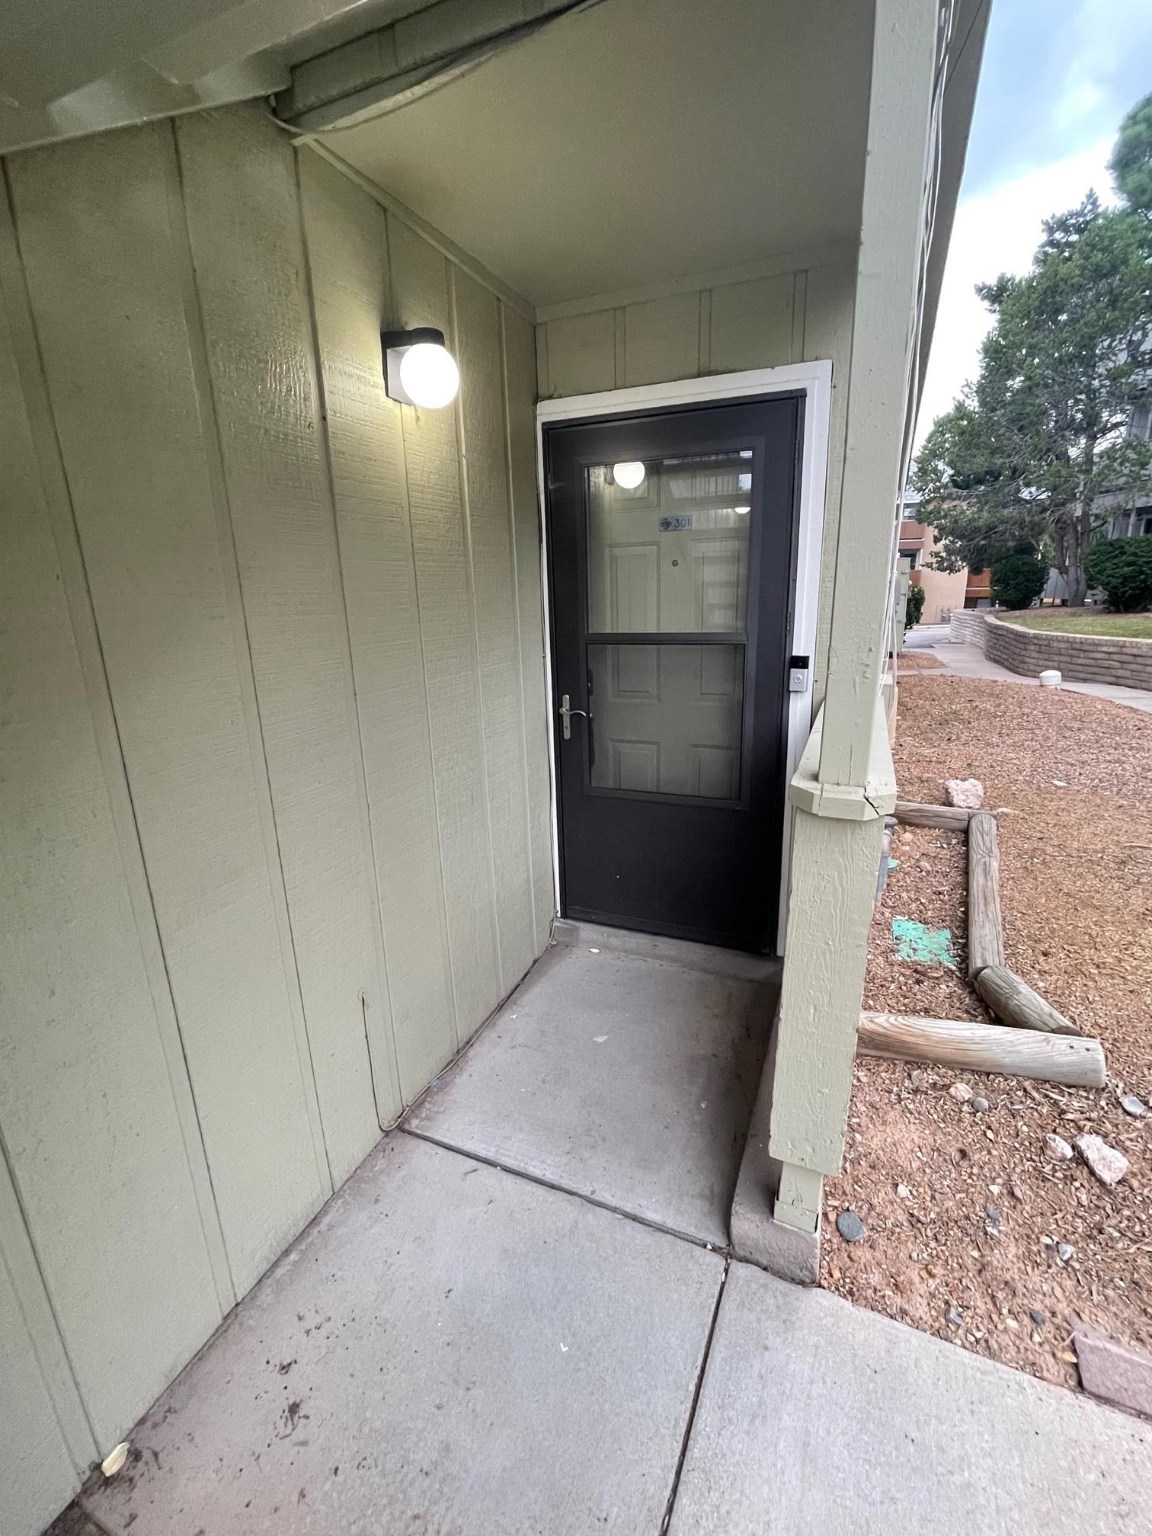 505 OPPENHEIMER, Los Alamos, New Mexico 87544, 1 Bedroom Bedrooms, ,1 BathroomBathrooms,Residential,For Sale,505 OPPENHEIMER,202104149